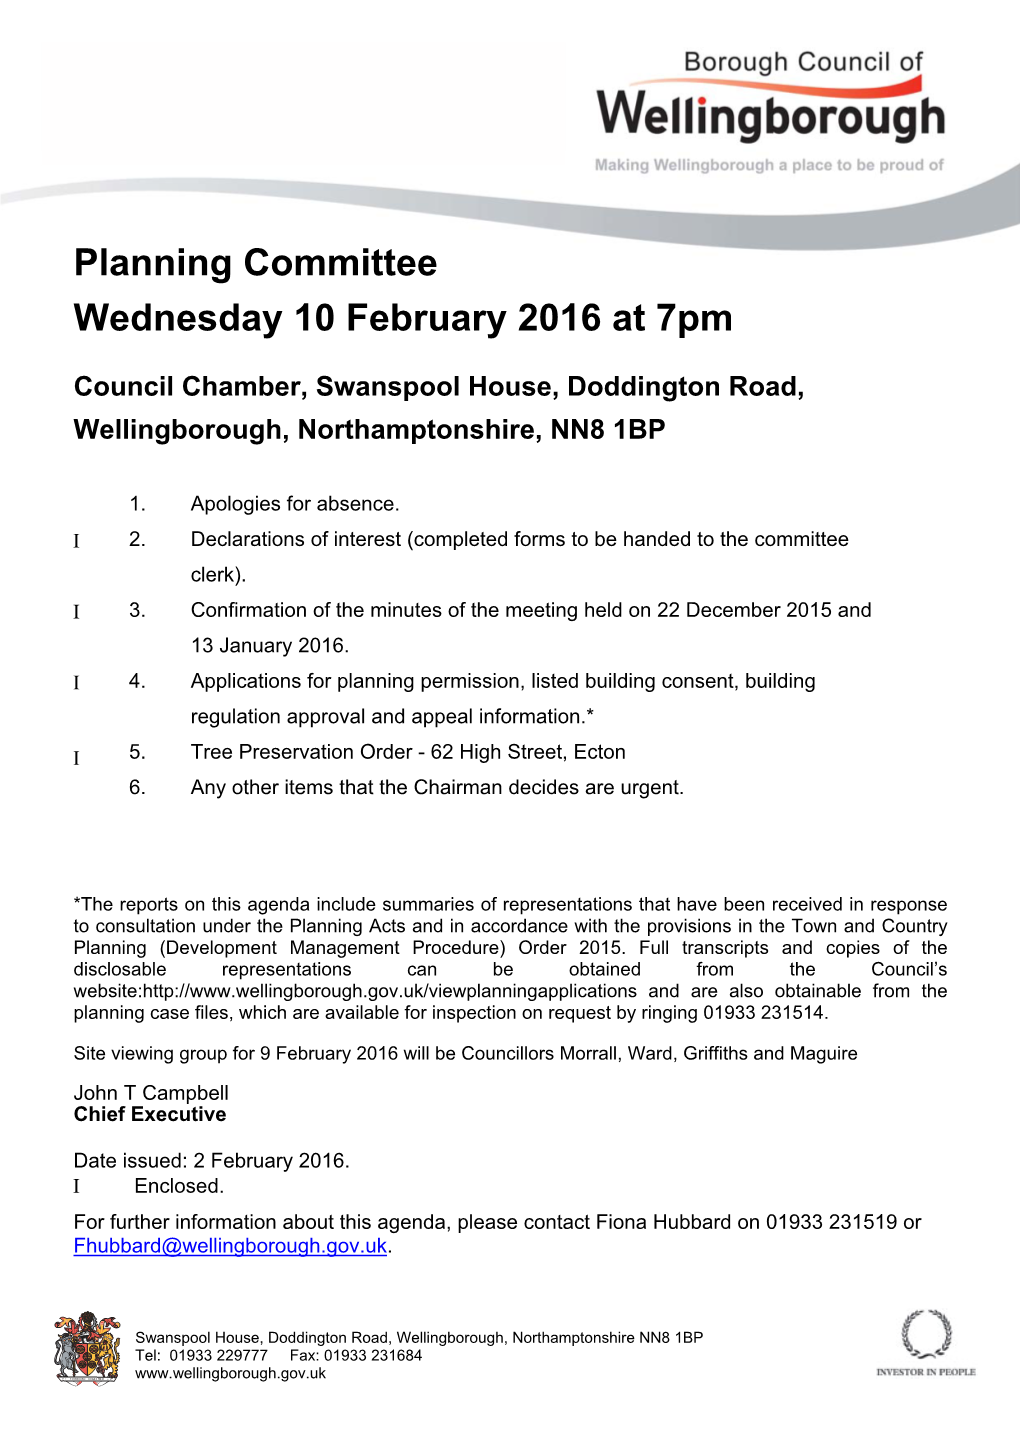 Planning Committee Wednesday 10 February 2016 at 7.00 Pm Council Chamber, Swanspool House